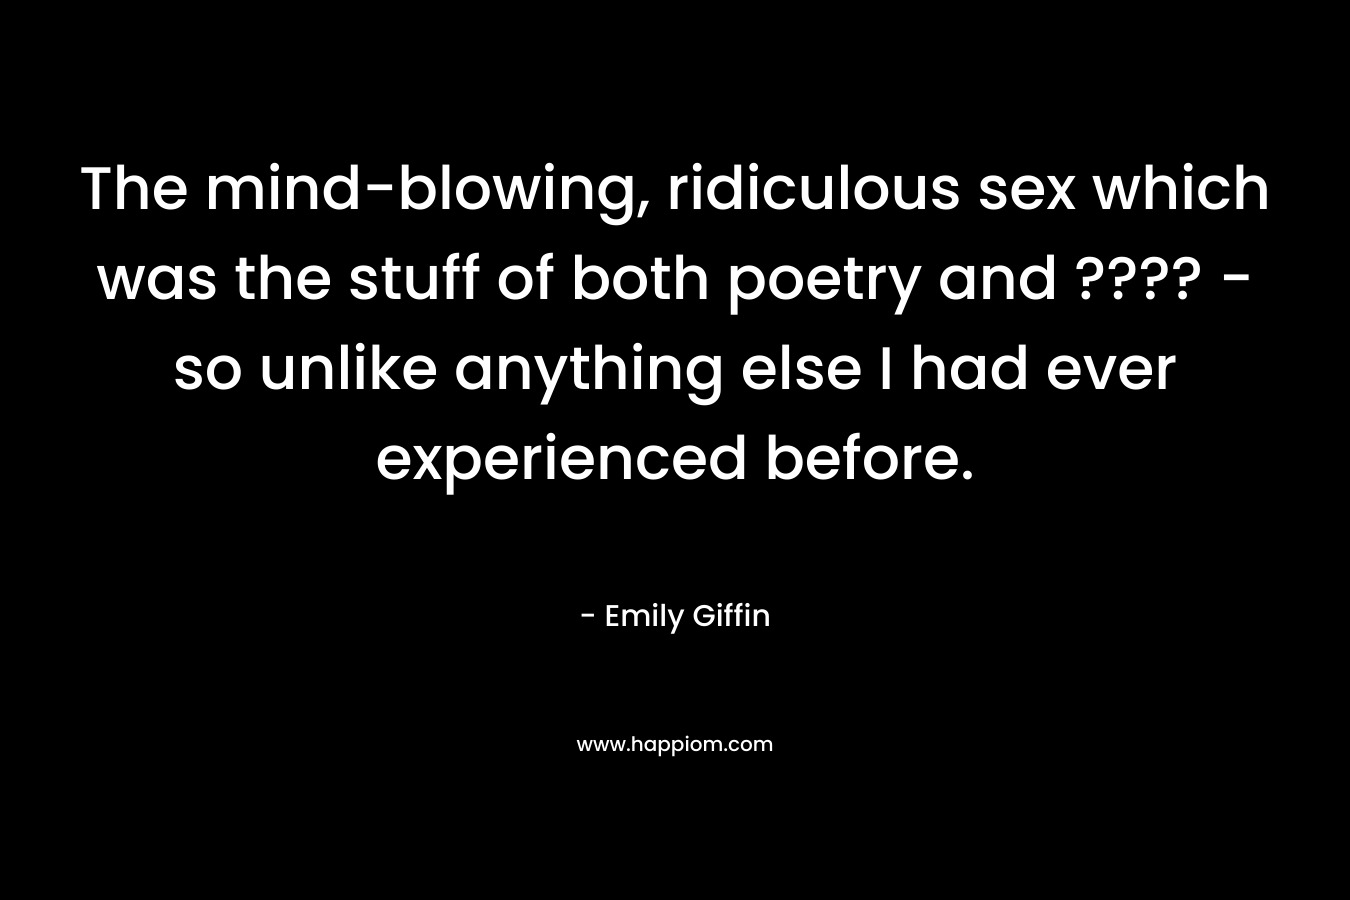 The mind-blowing, ridiculous sex which was the stuff of both poetry and ???? - so unlike anything else I had ever experienced before.